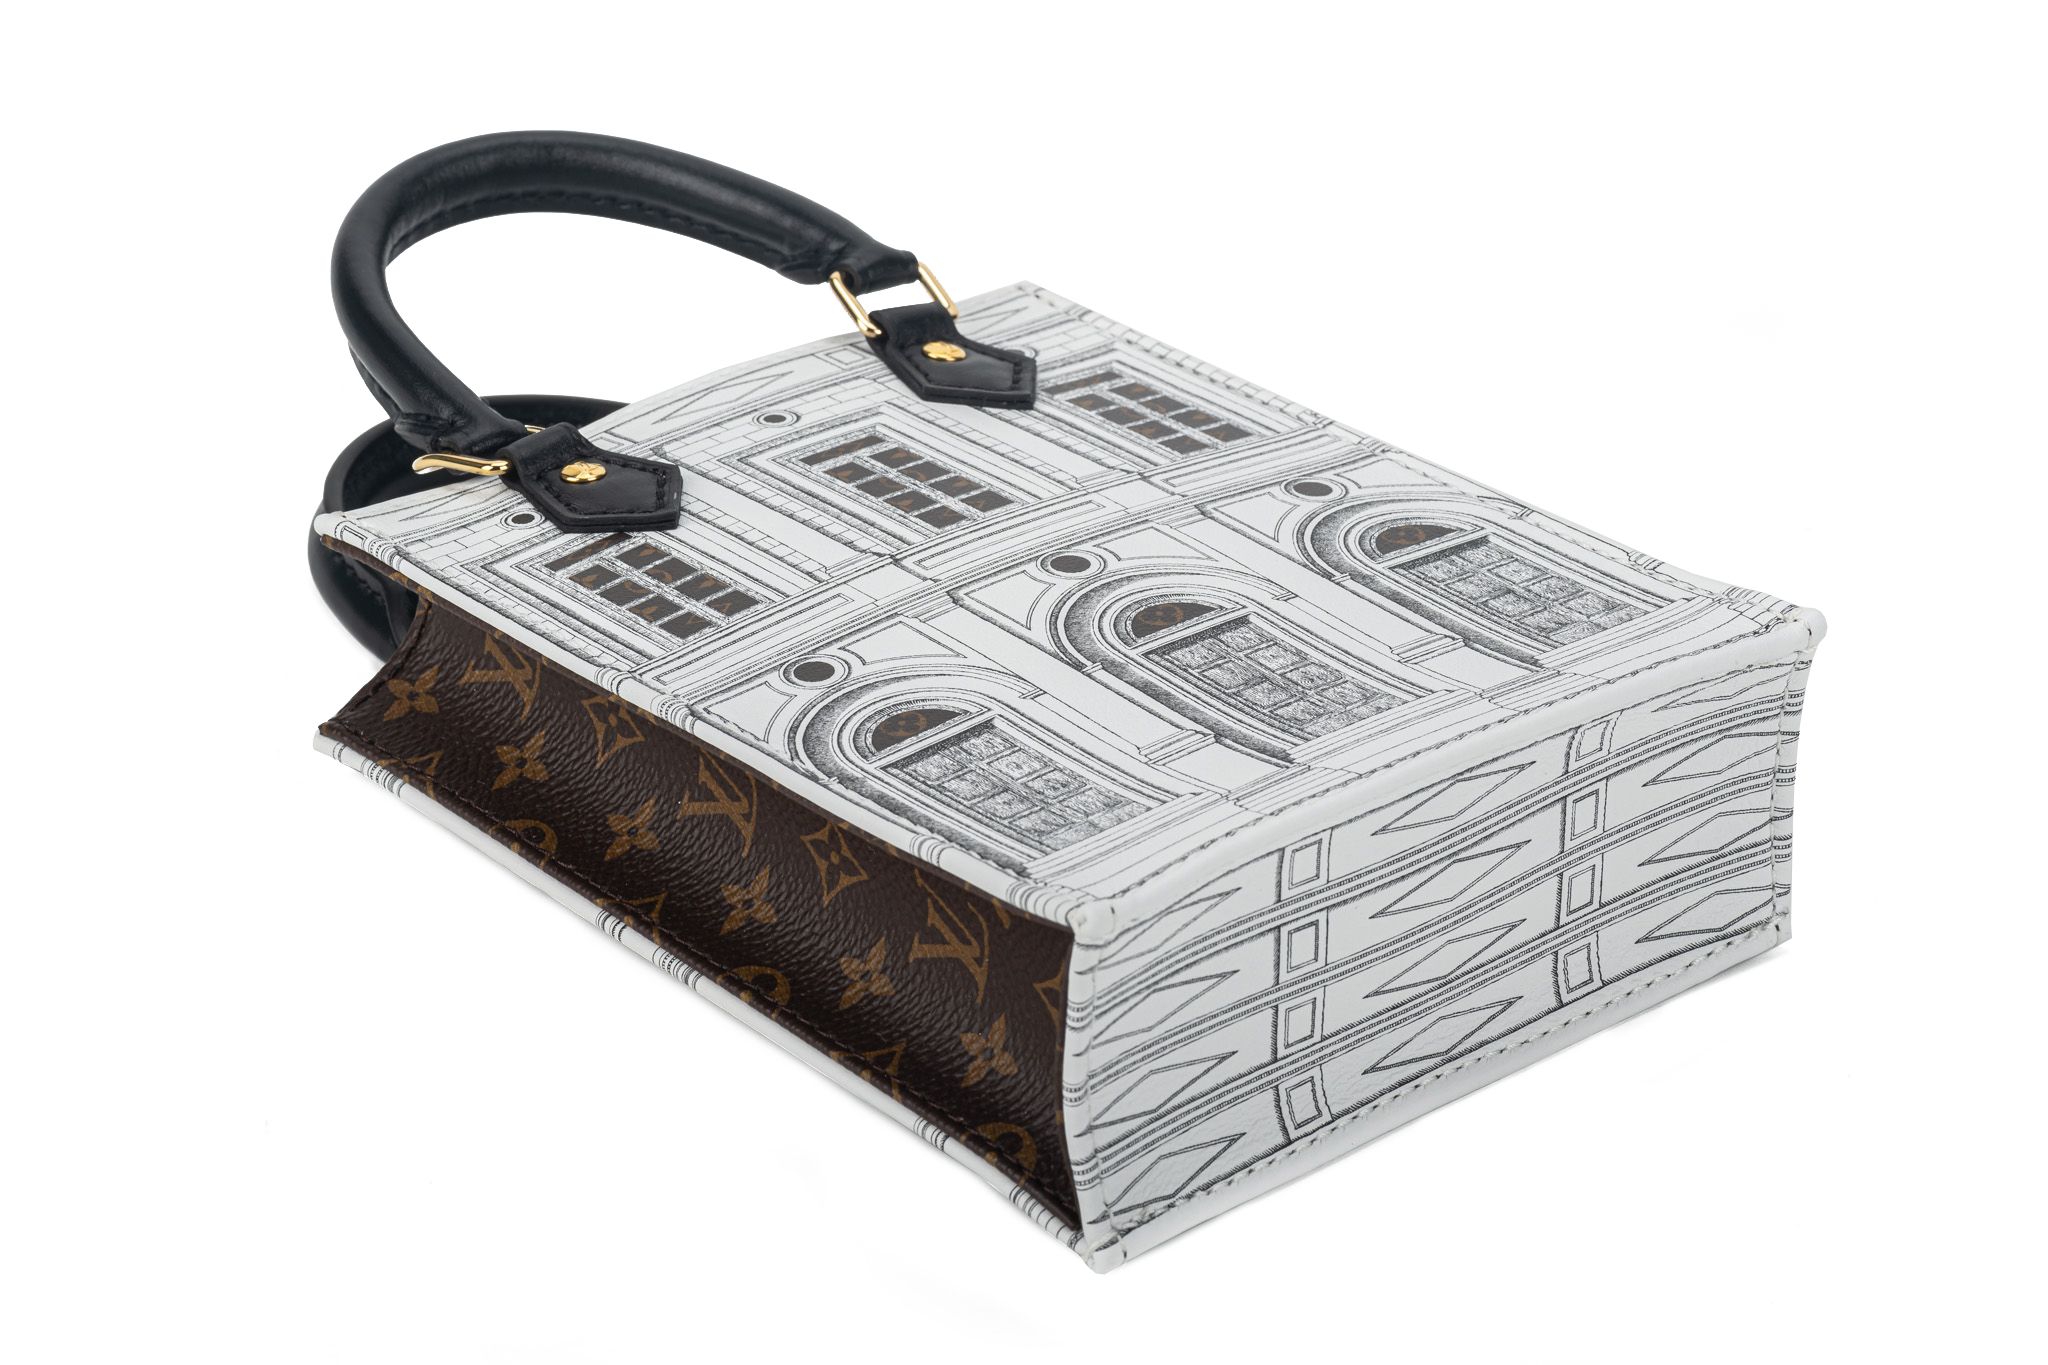 New Louis Vuitton Limited Edition Fornasetti Sac Plat Bag